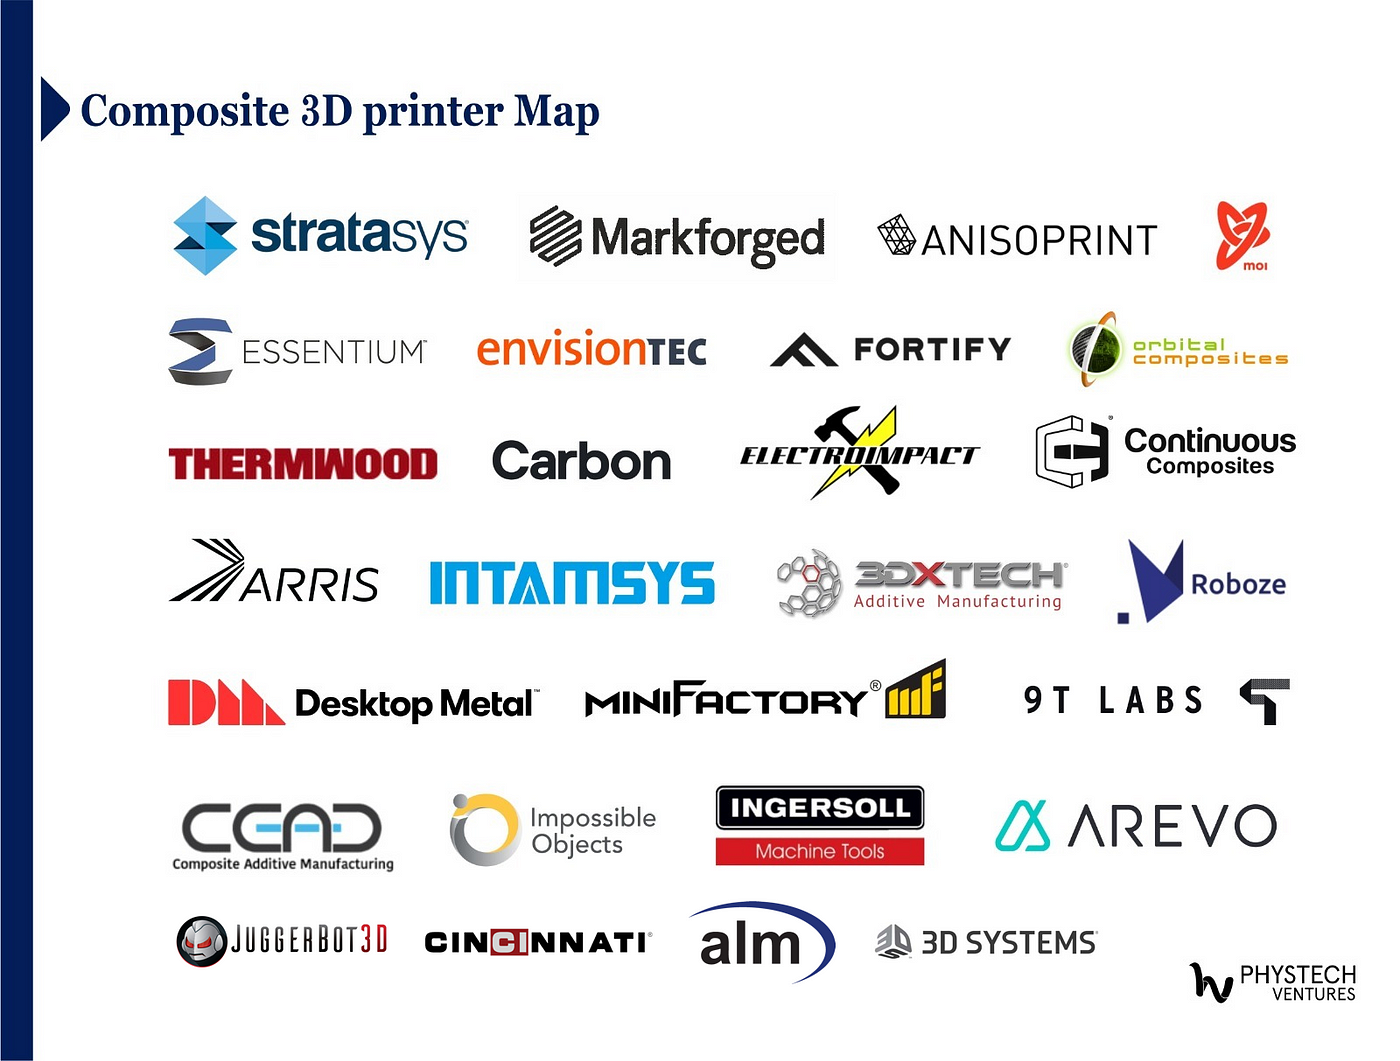 3D Printers: Still only for Prototyping, or Is There Mass-Production  Potential? | by Daniel Shaposhnikov | Phystech Ventures | Medium